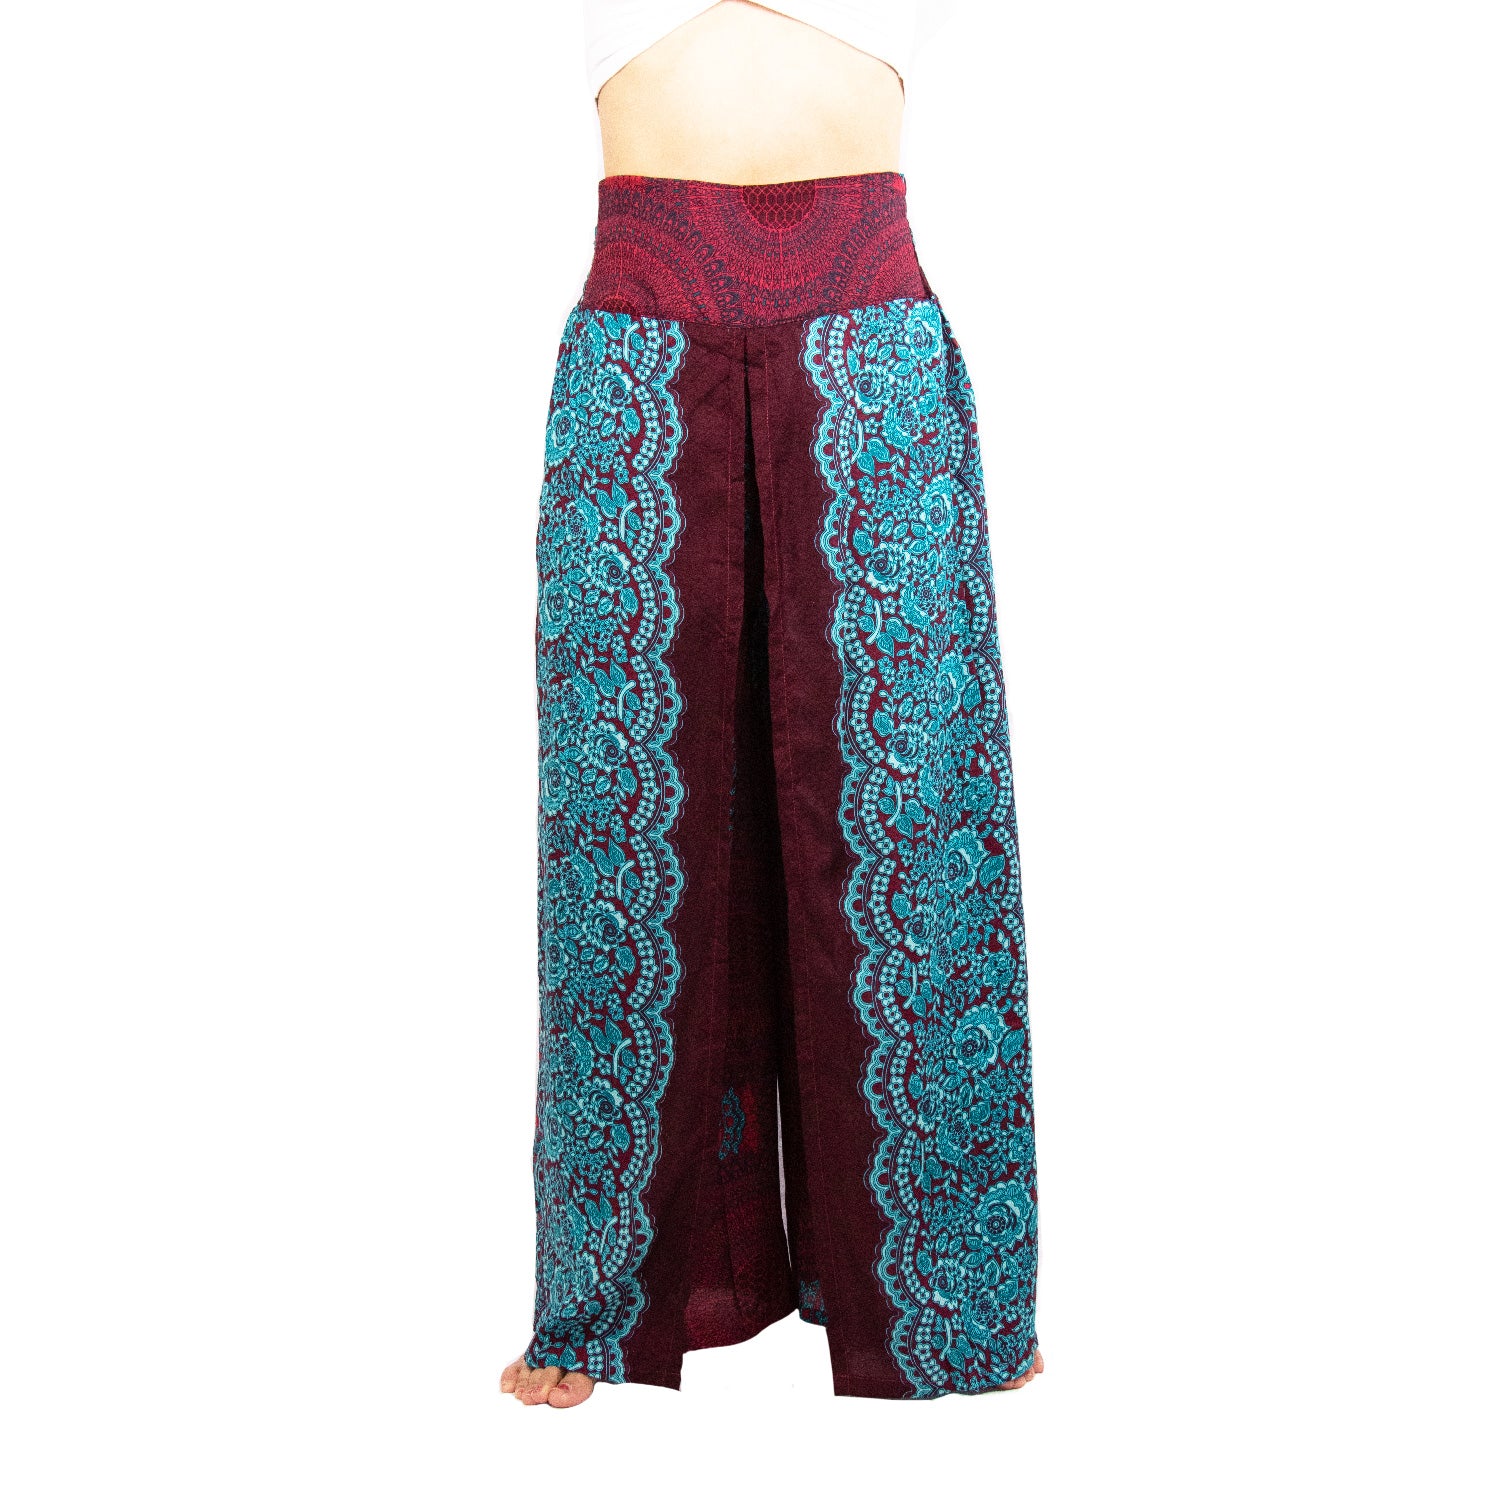 Buy Maroon Knitted Cotton Blend Yoga Pants (Yoga Pants) for INR850